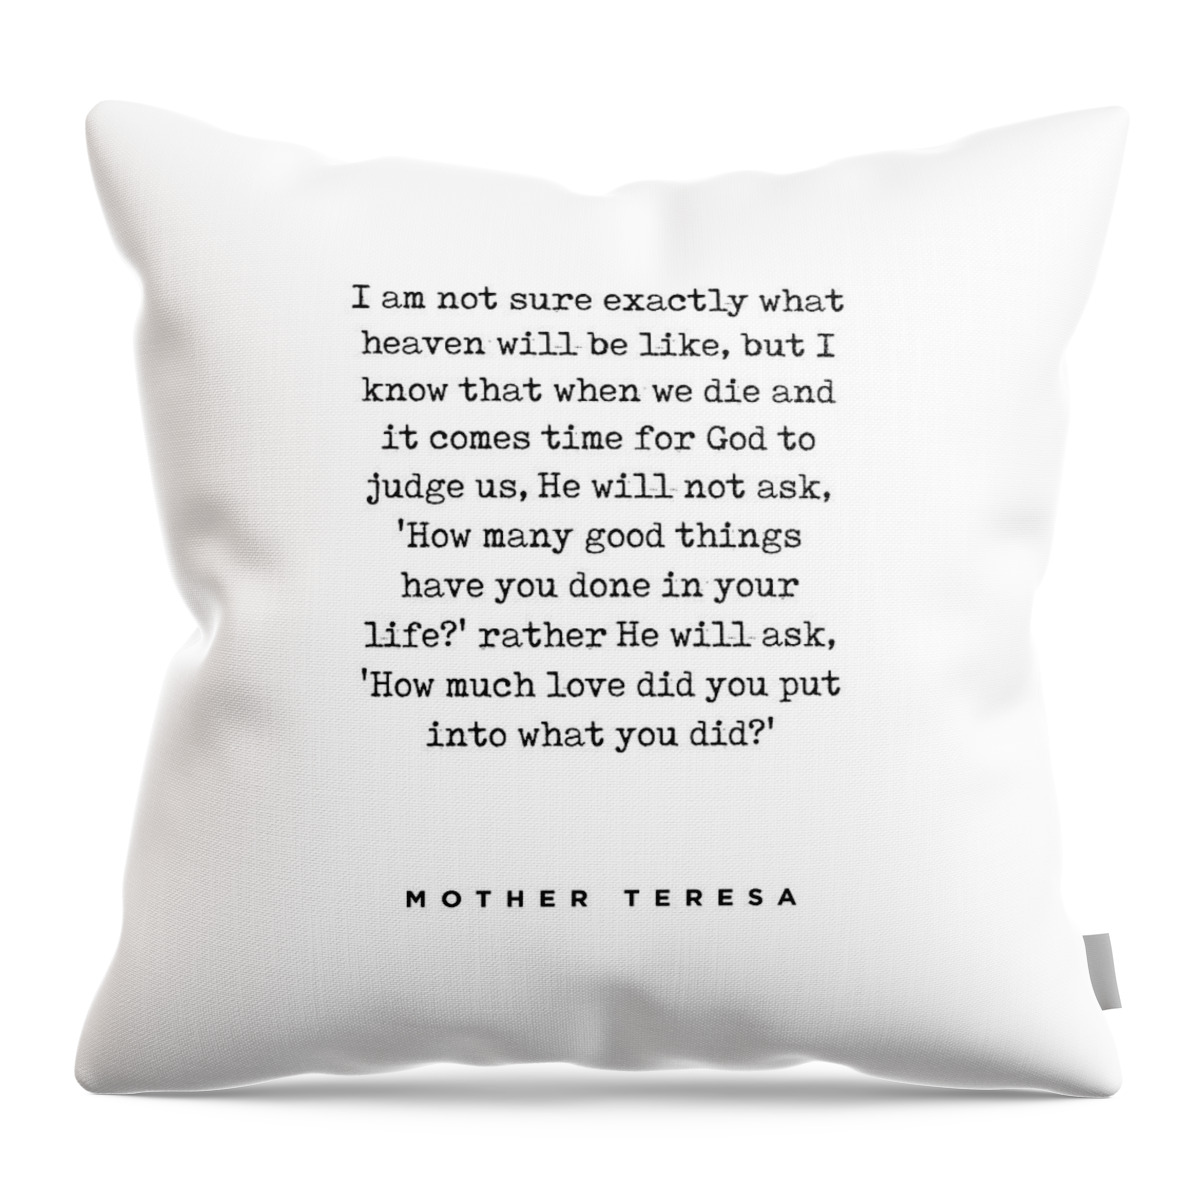 Mother Teresa Throw Pillow featuring the digital art Mother Teresa Quote - How much Love - Inspiring, Motivational Quote - Minimalist, Typewriter Print by Studio Grafiikka